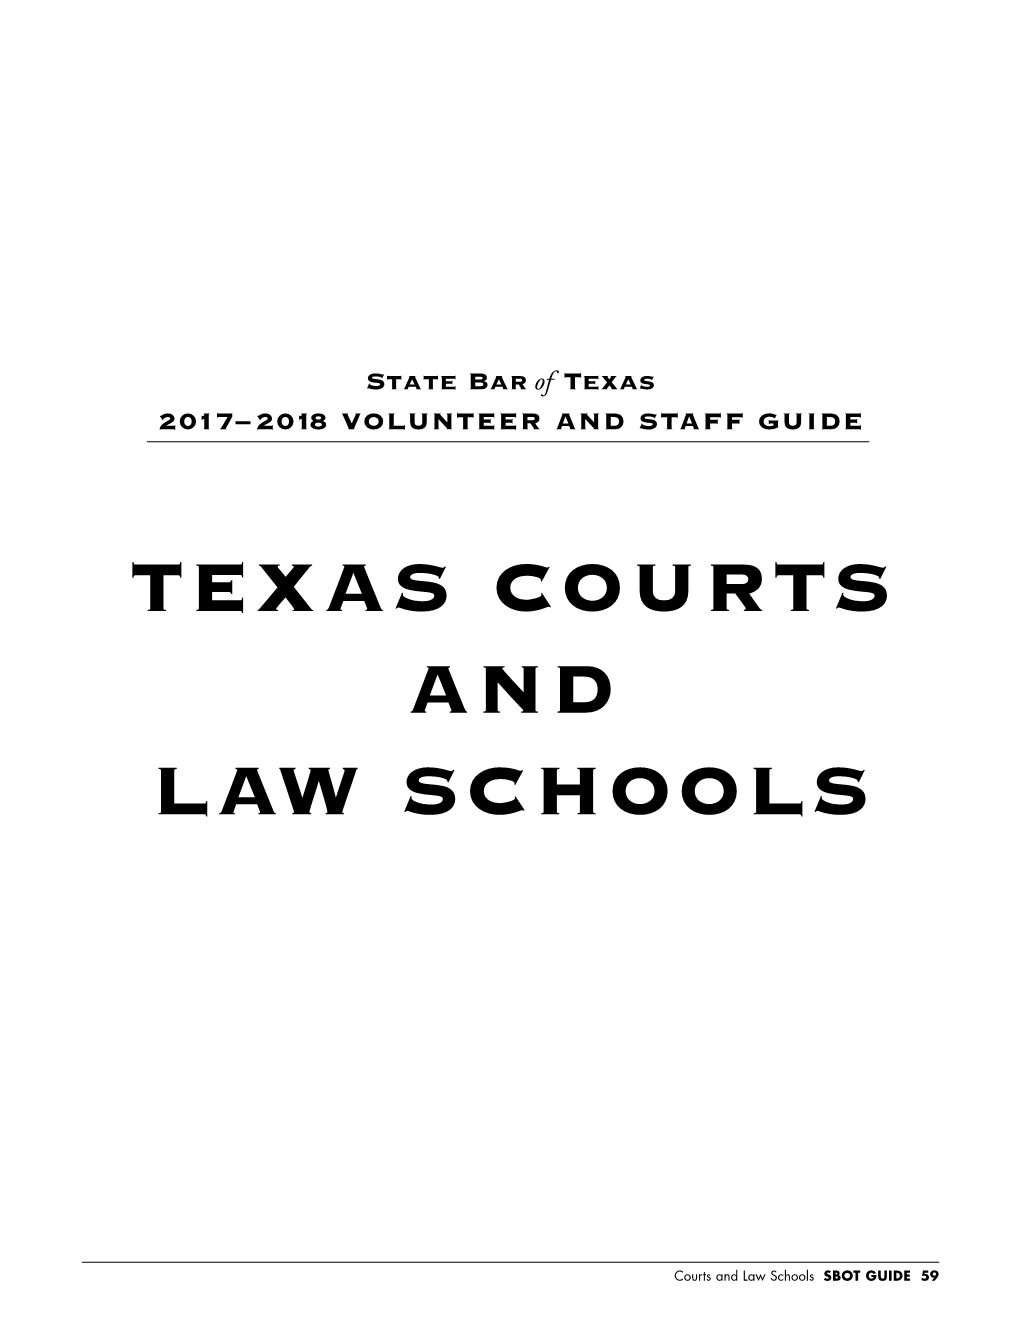 Texas Courts and Law Schools